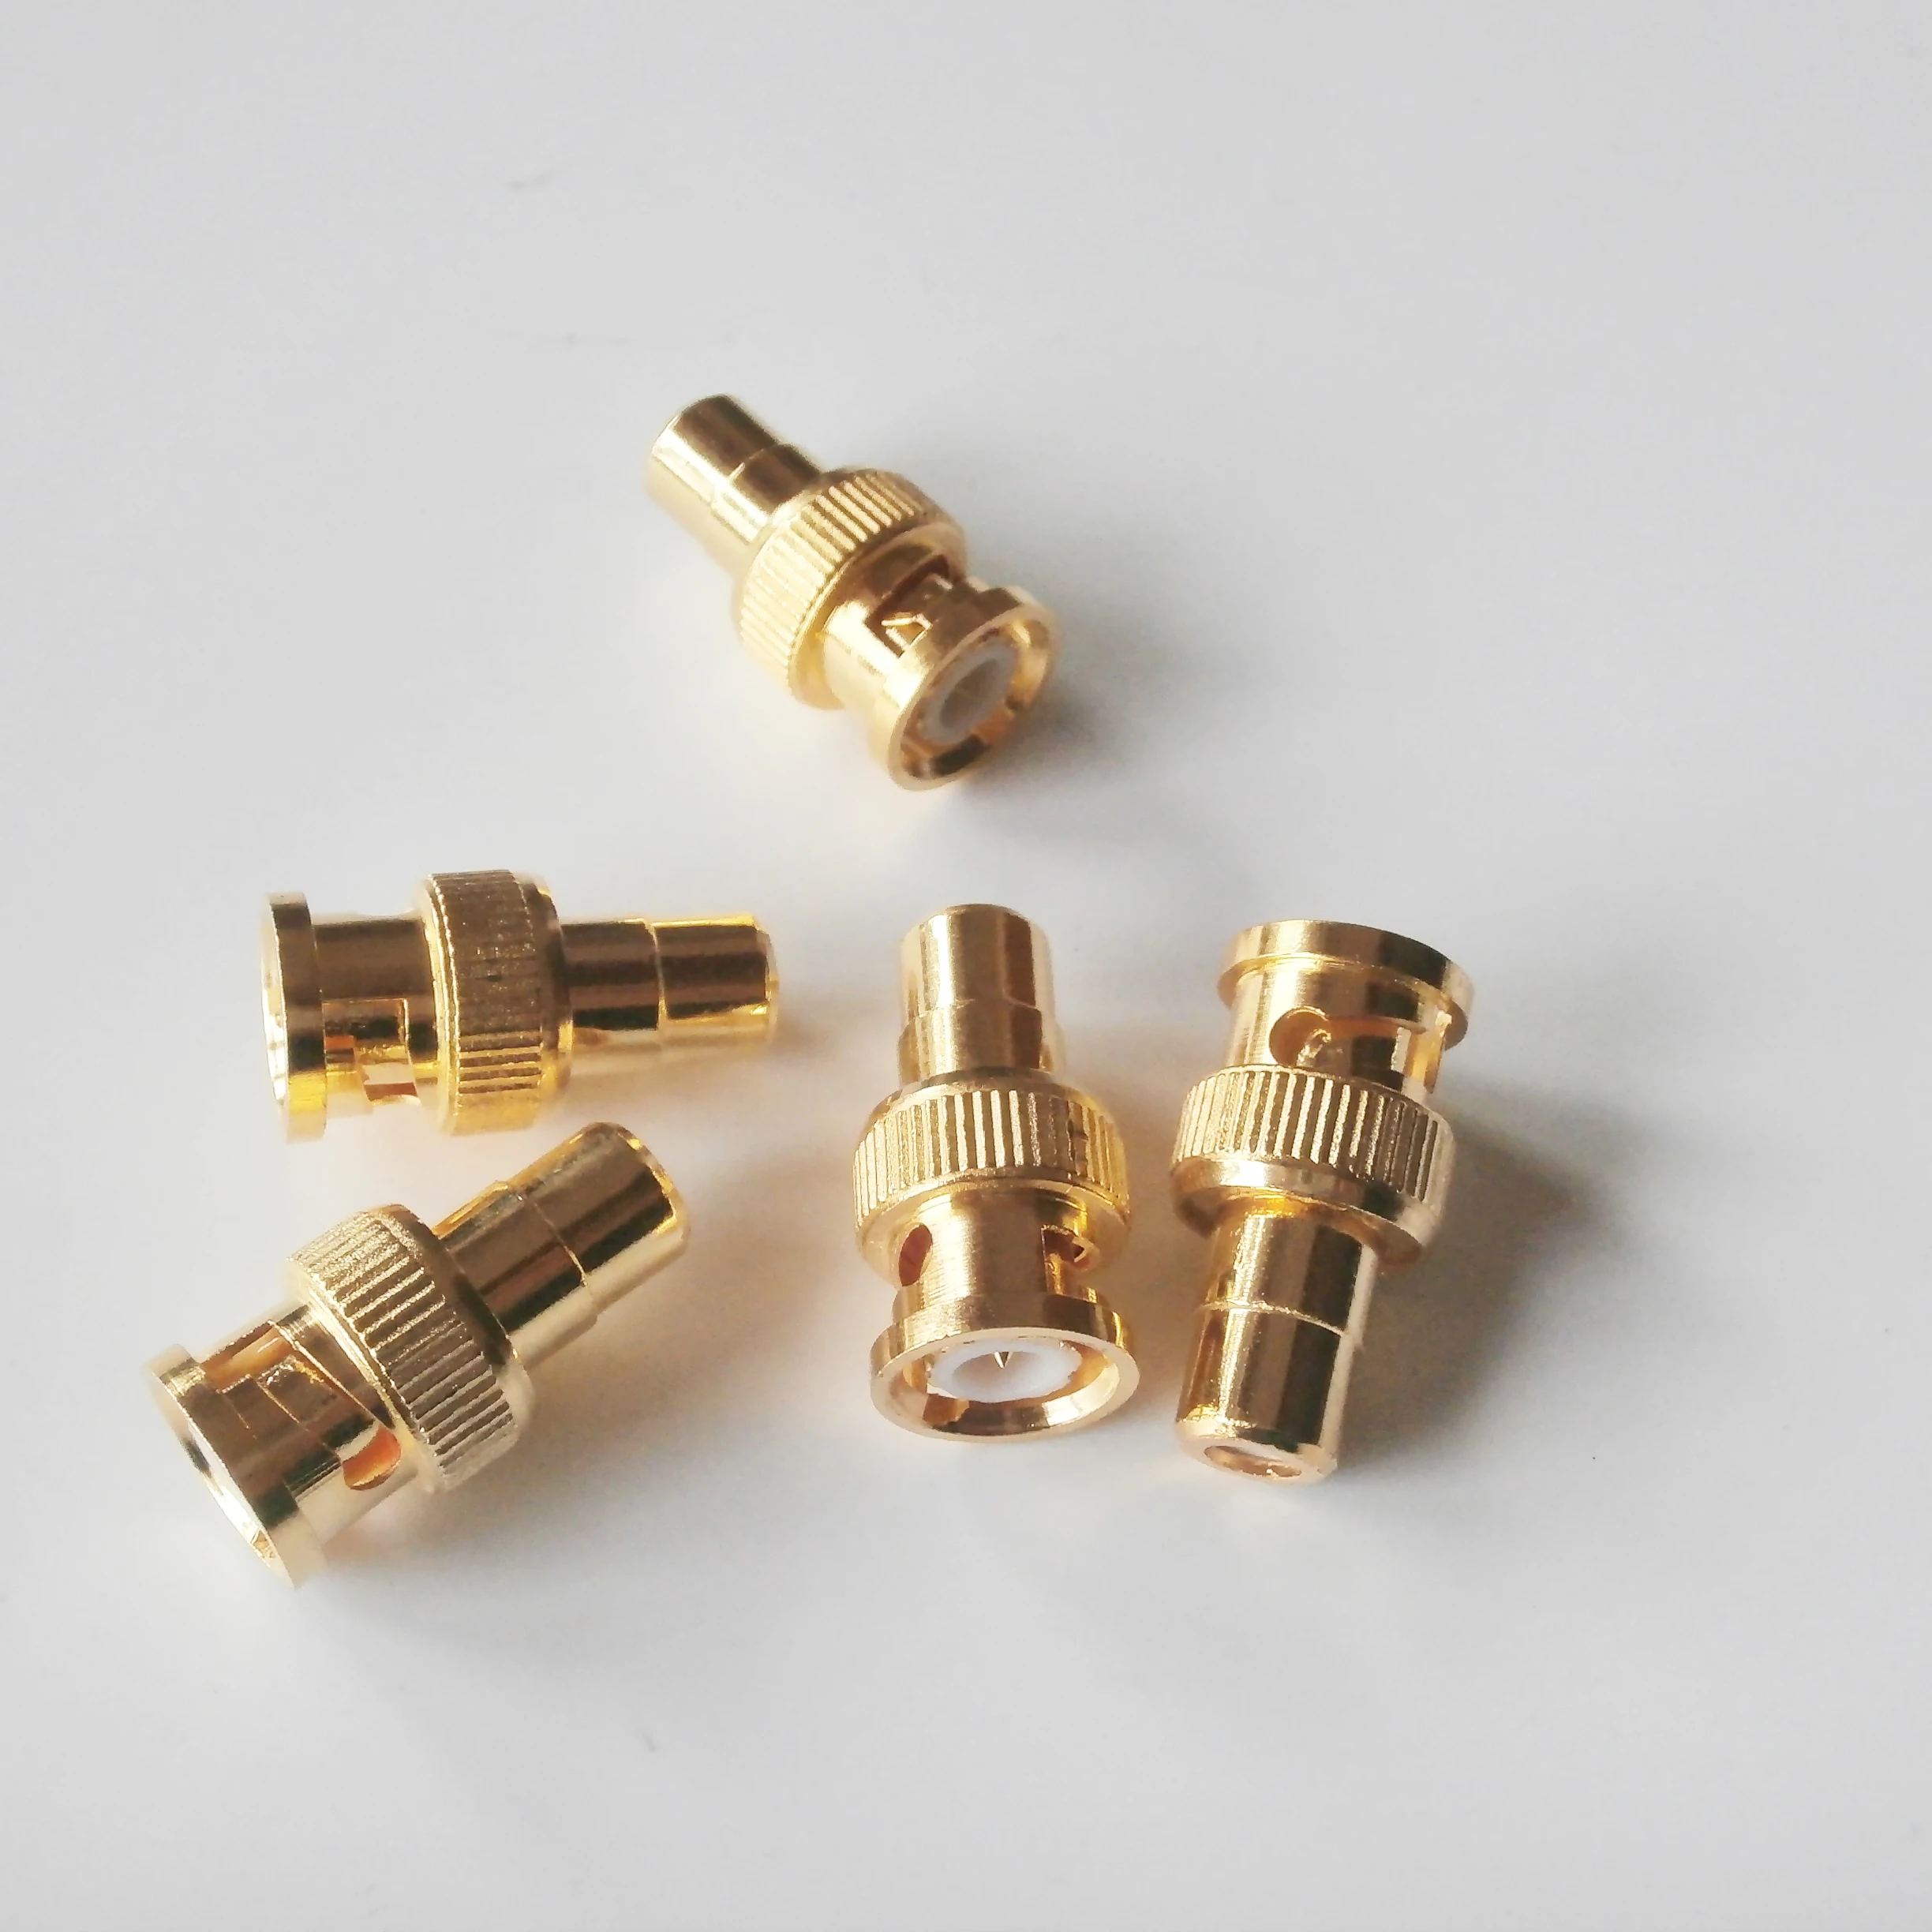 

1X Pcs Q9 BNC Male To RCA Female Plug BNC to RCA GOLD Plated Brass Straight Coaxial RF Connector Socket Adapters